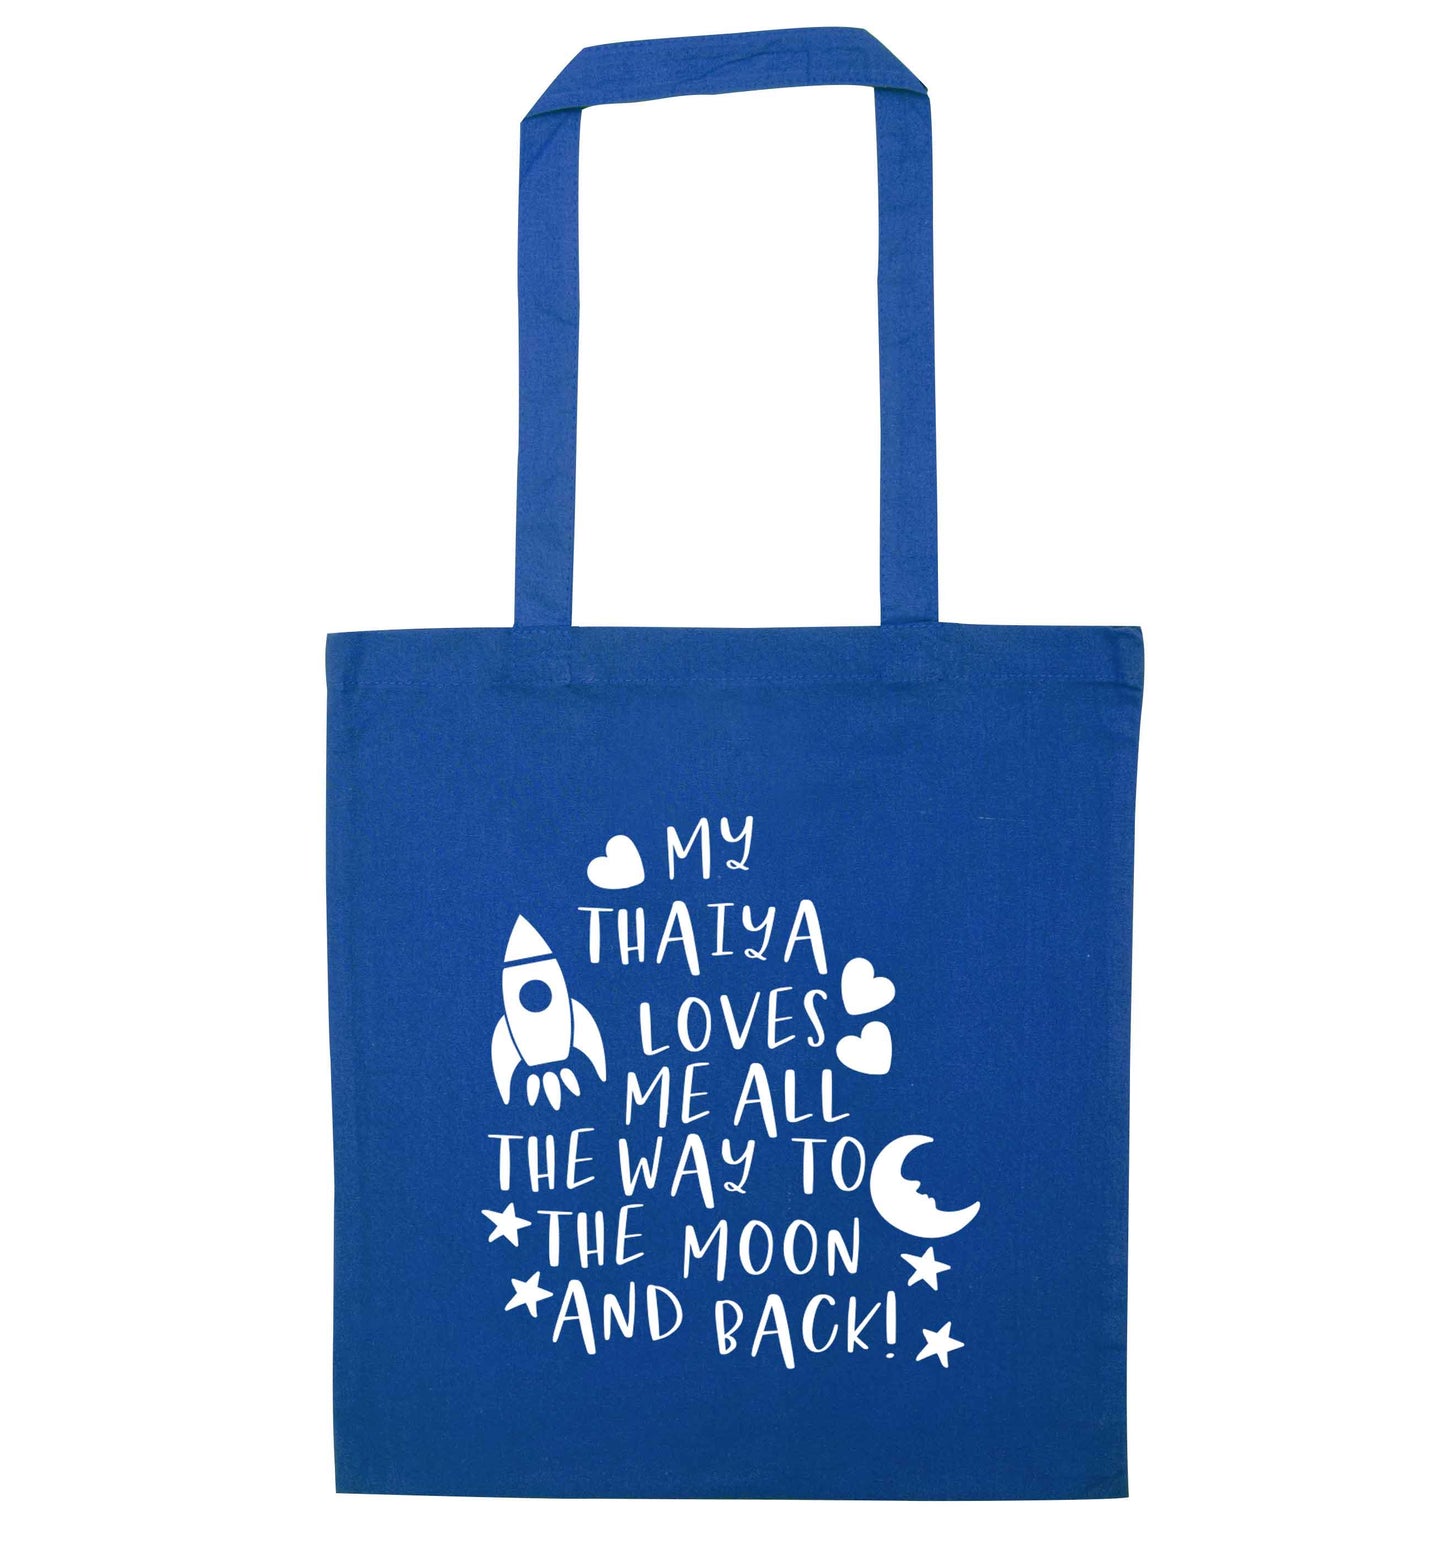 My thaiya loves me all the way to the moon and back blue tote bag